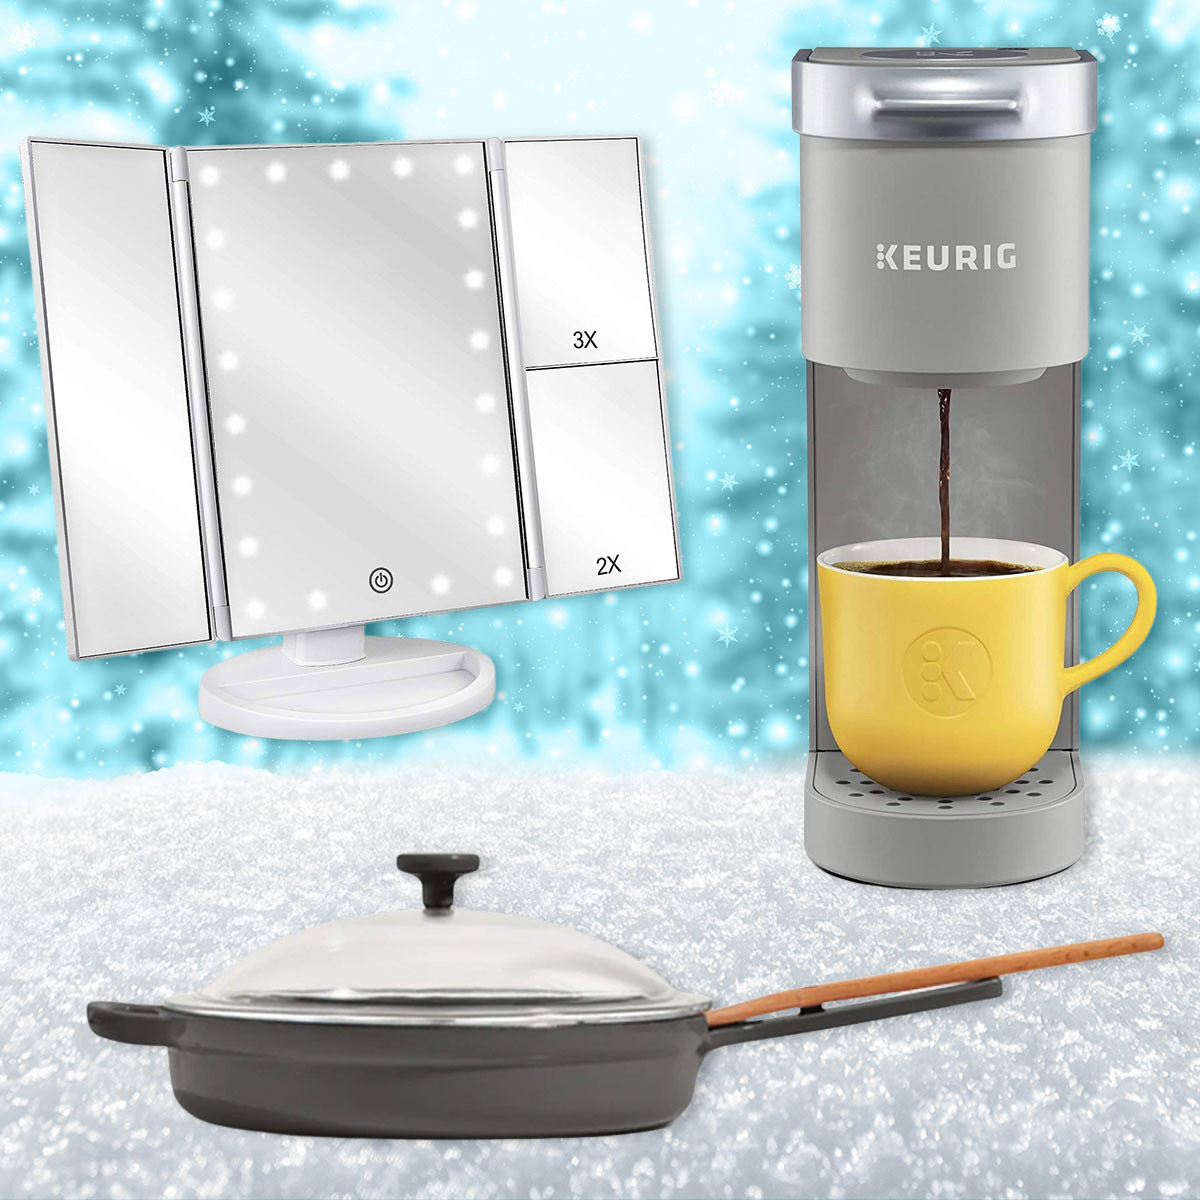 21 Practical Gifts People Will Actually Want To Get for the Holidays